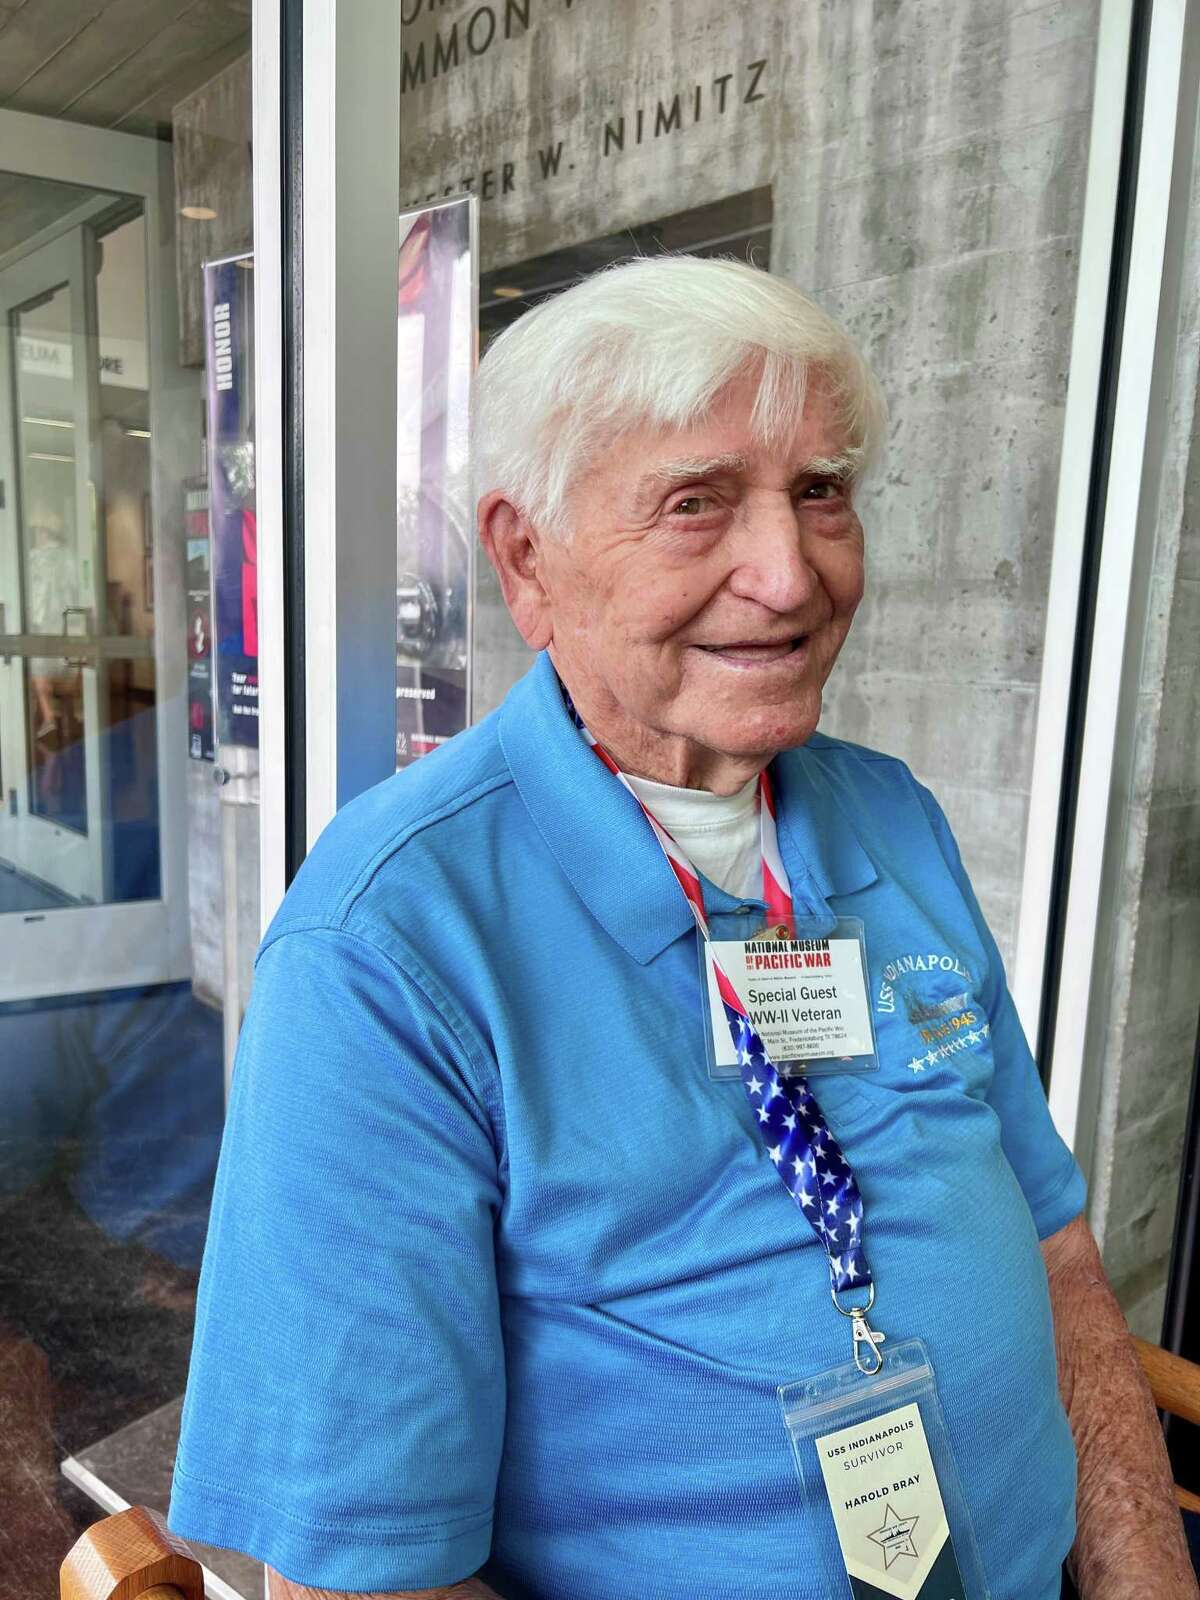 USS Indianapolis survivor Harold Bray is one of the last two surviving crew members of the USS Indianapolis which was sunk July 30, 1945 after being struck by two Japanese torpedoes.